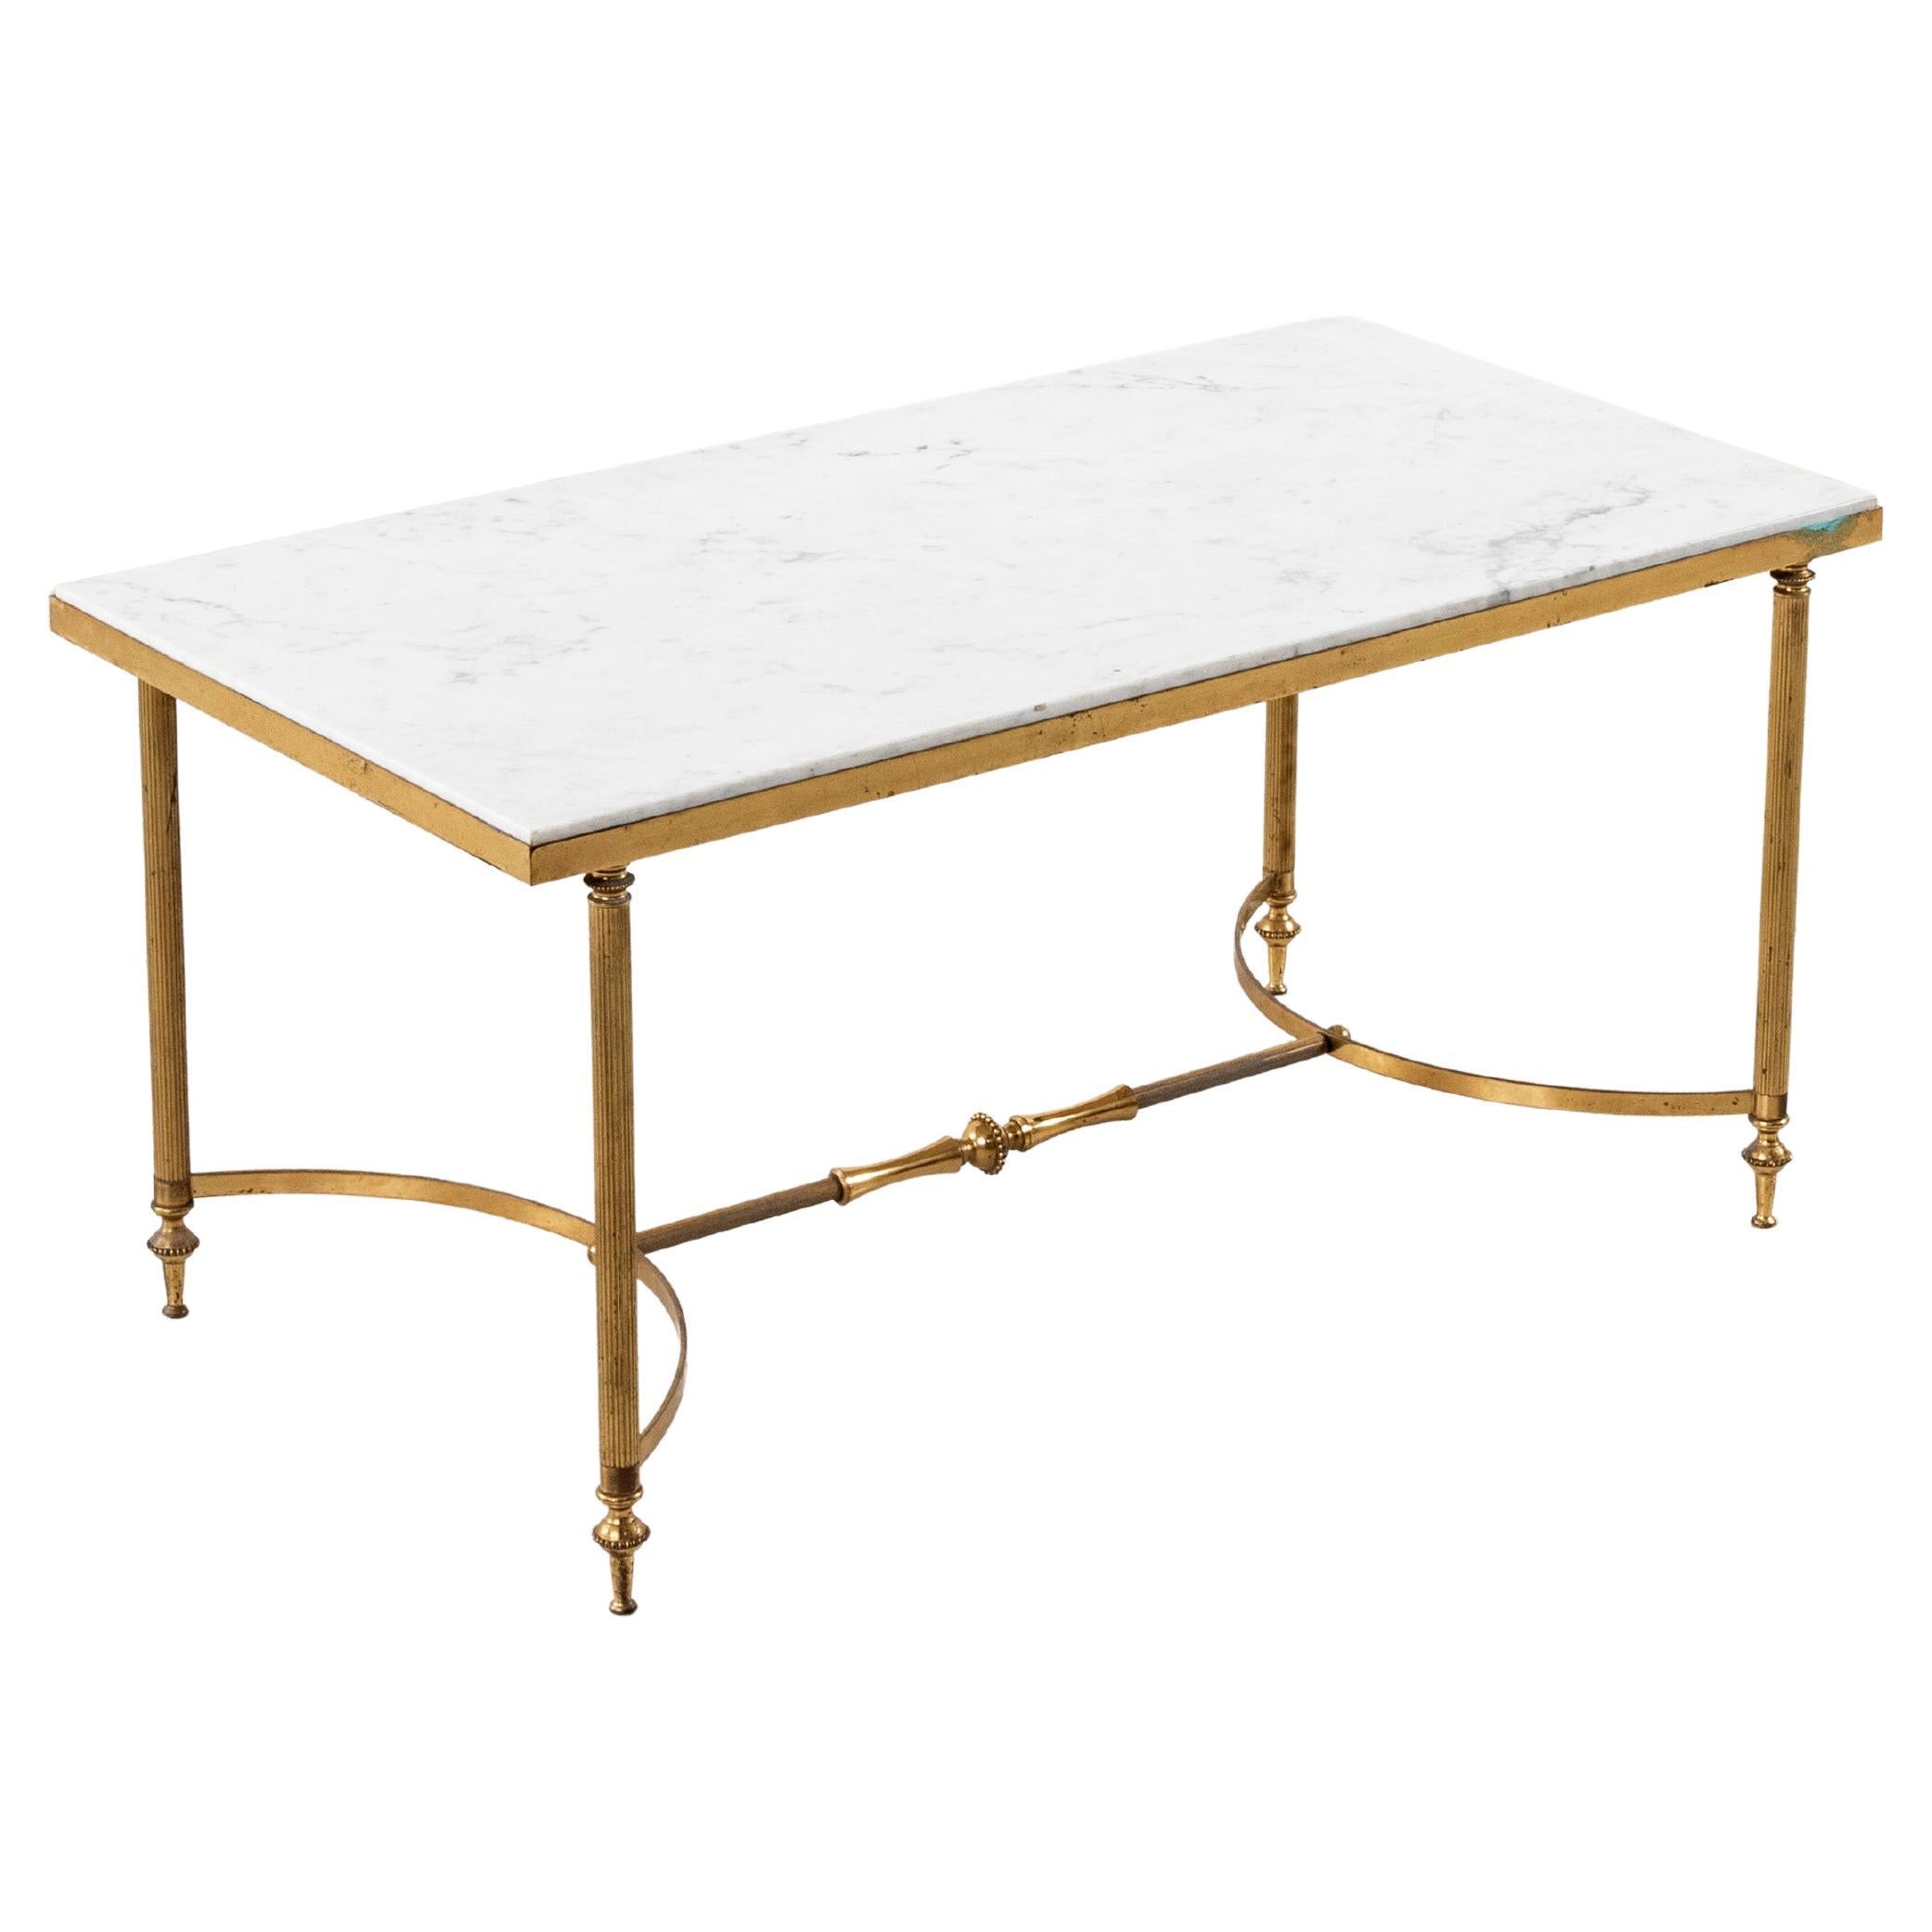 Mid-20th Century French Marble and Brass Coffee Table, Cocktail Table